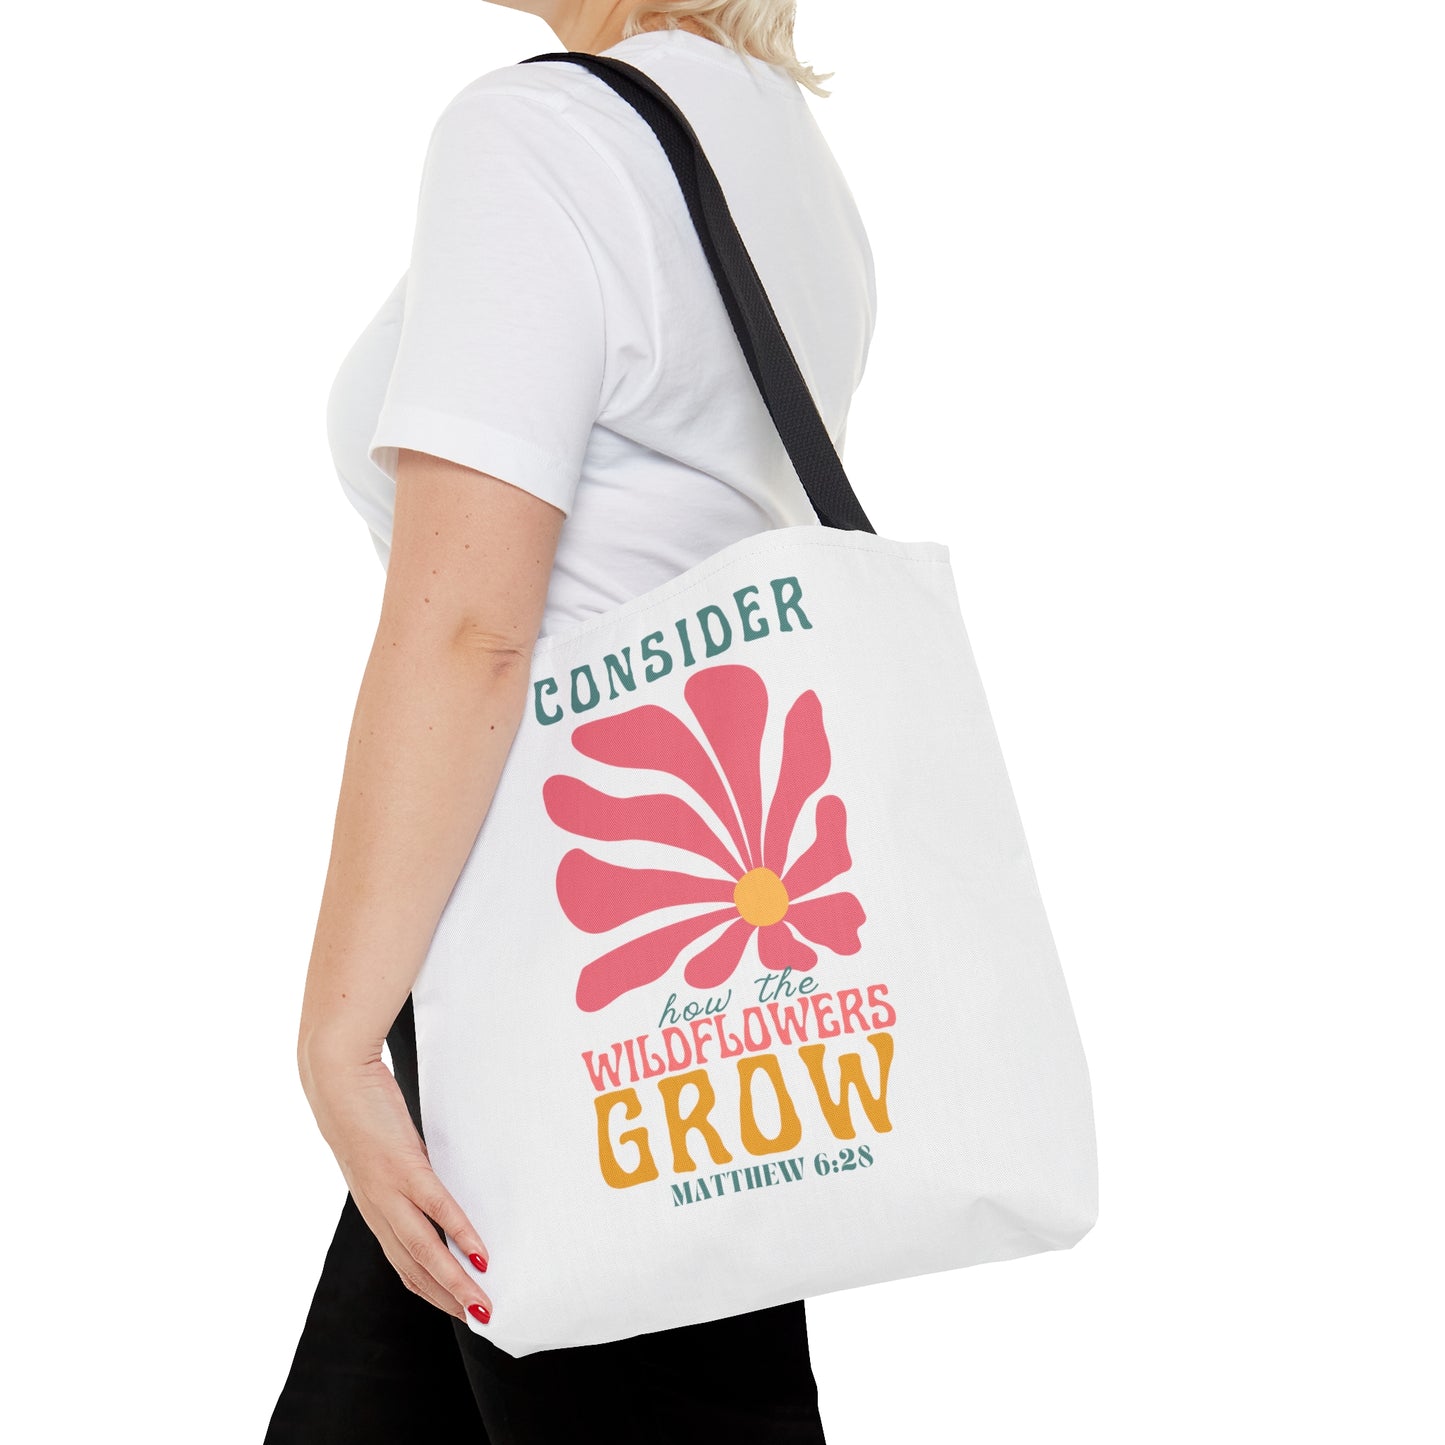 Consider How the Wildflowers Grow- White Retro Tote Bag